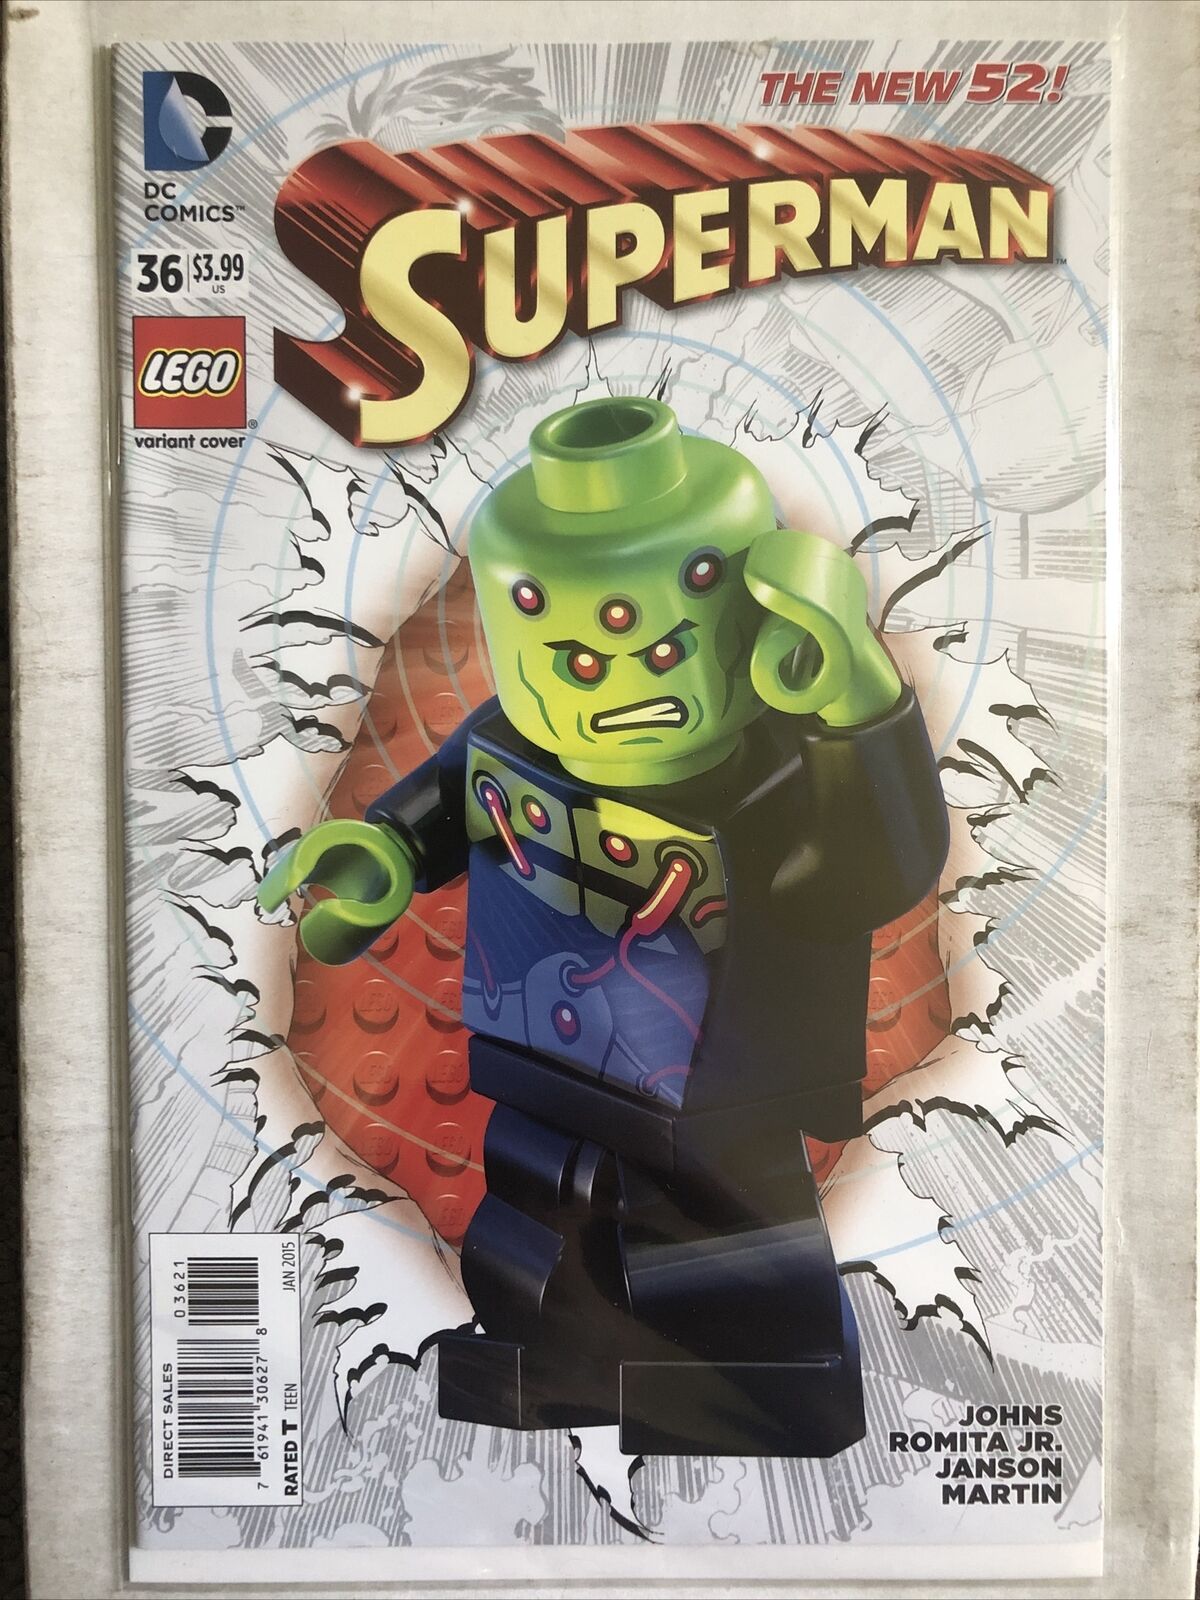 4 Lego Variant Cover New 52 Issues- Superman, Supergirl Wonder Woman And JL Dark